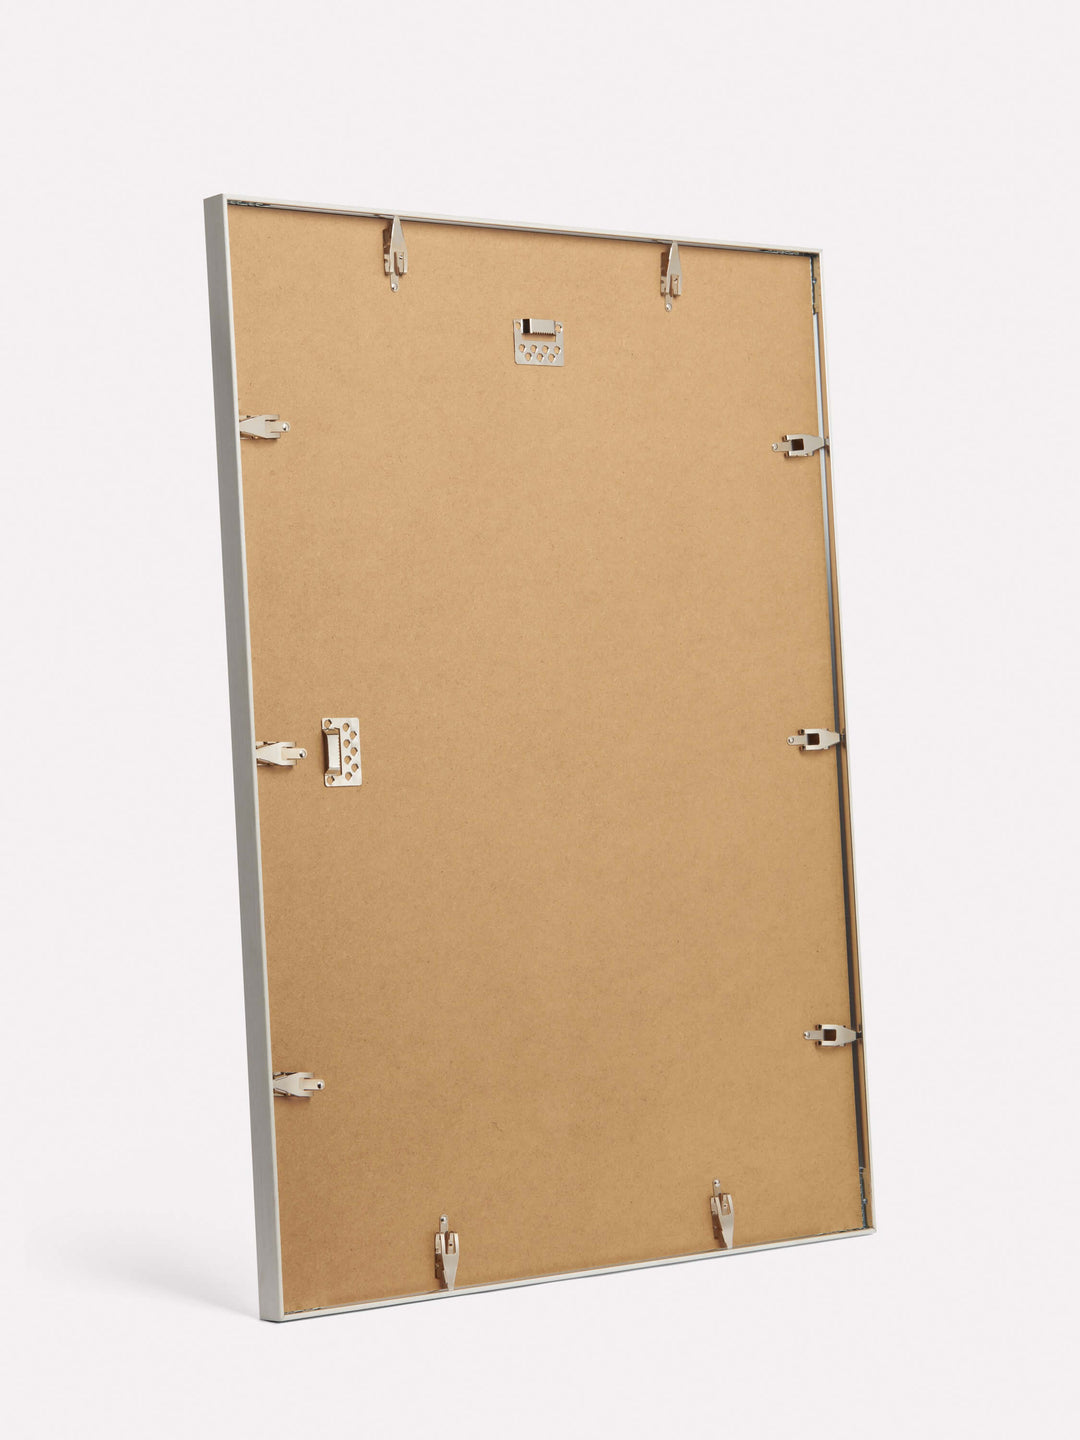 30x40-inch Thin Frame, White - Back view